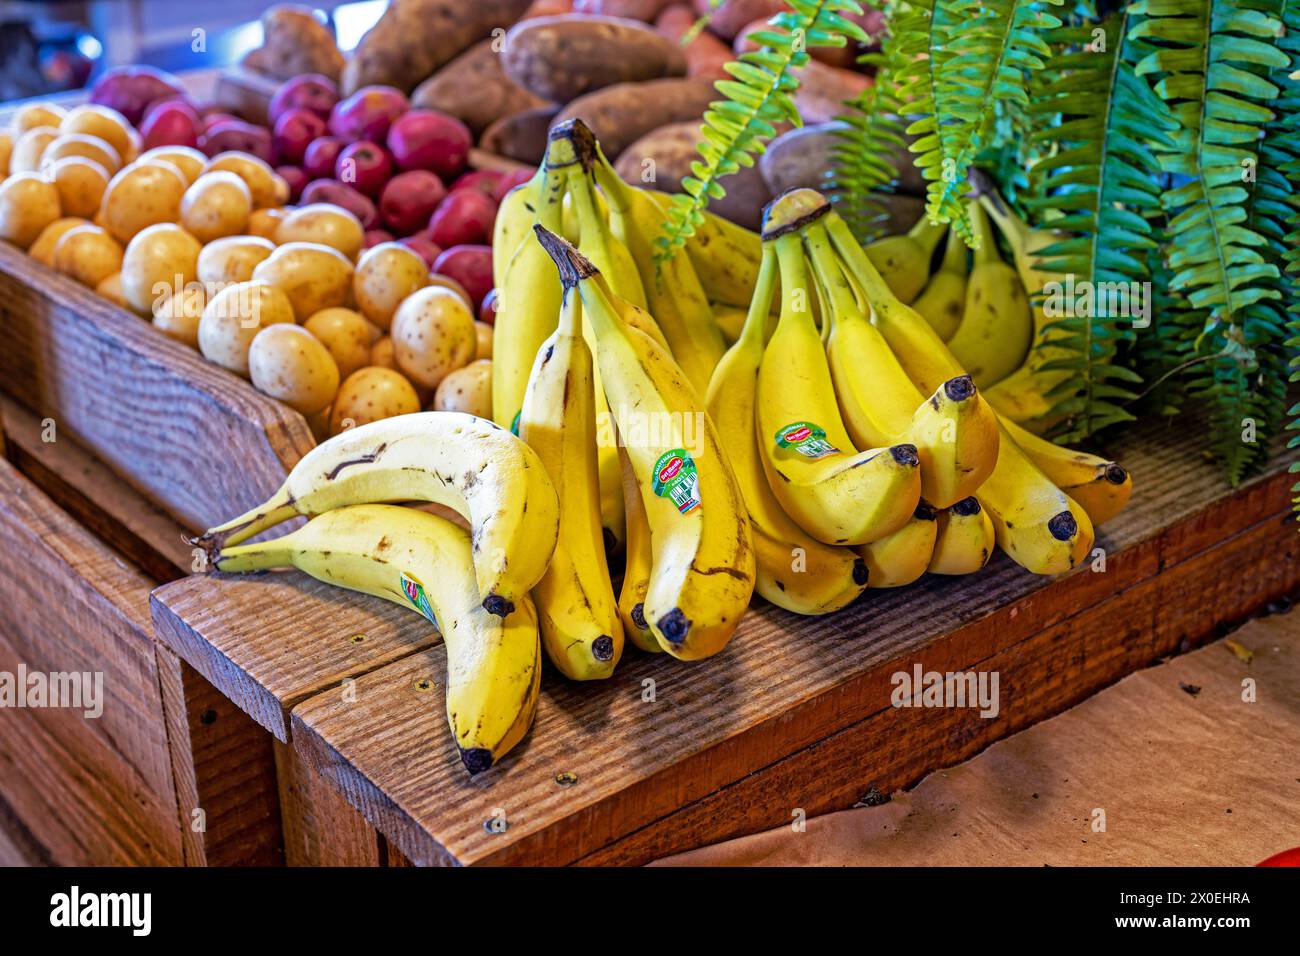 Fresh bunches of bananas and other vegetables at a produce market or farm or farmers market in Montgomery Alabama, USA. Stock Photo